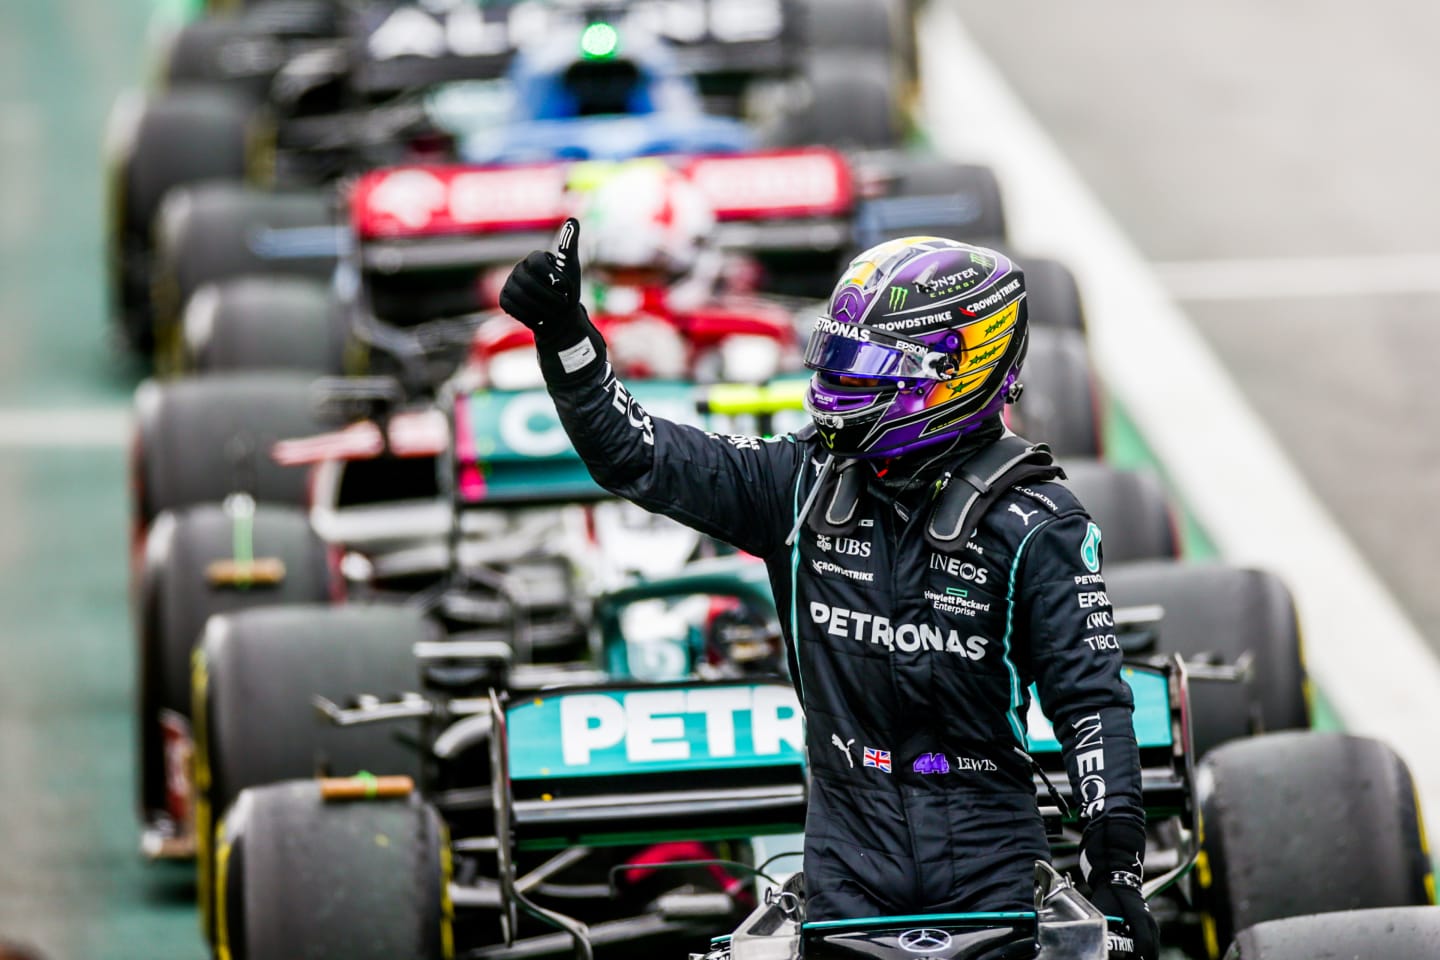 SAO PAULO, BRAZIL - NOVEMBER 13: Lewis Hamilton of Mercedes and Great Britain waves to the crowd